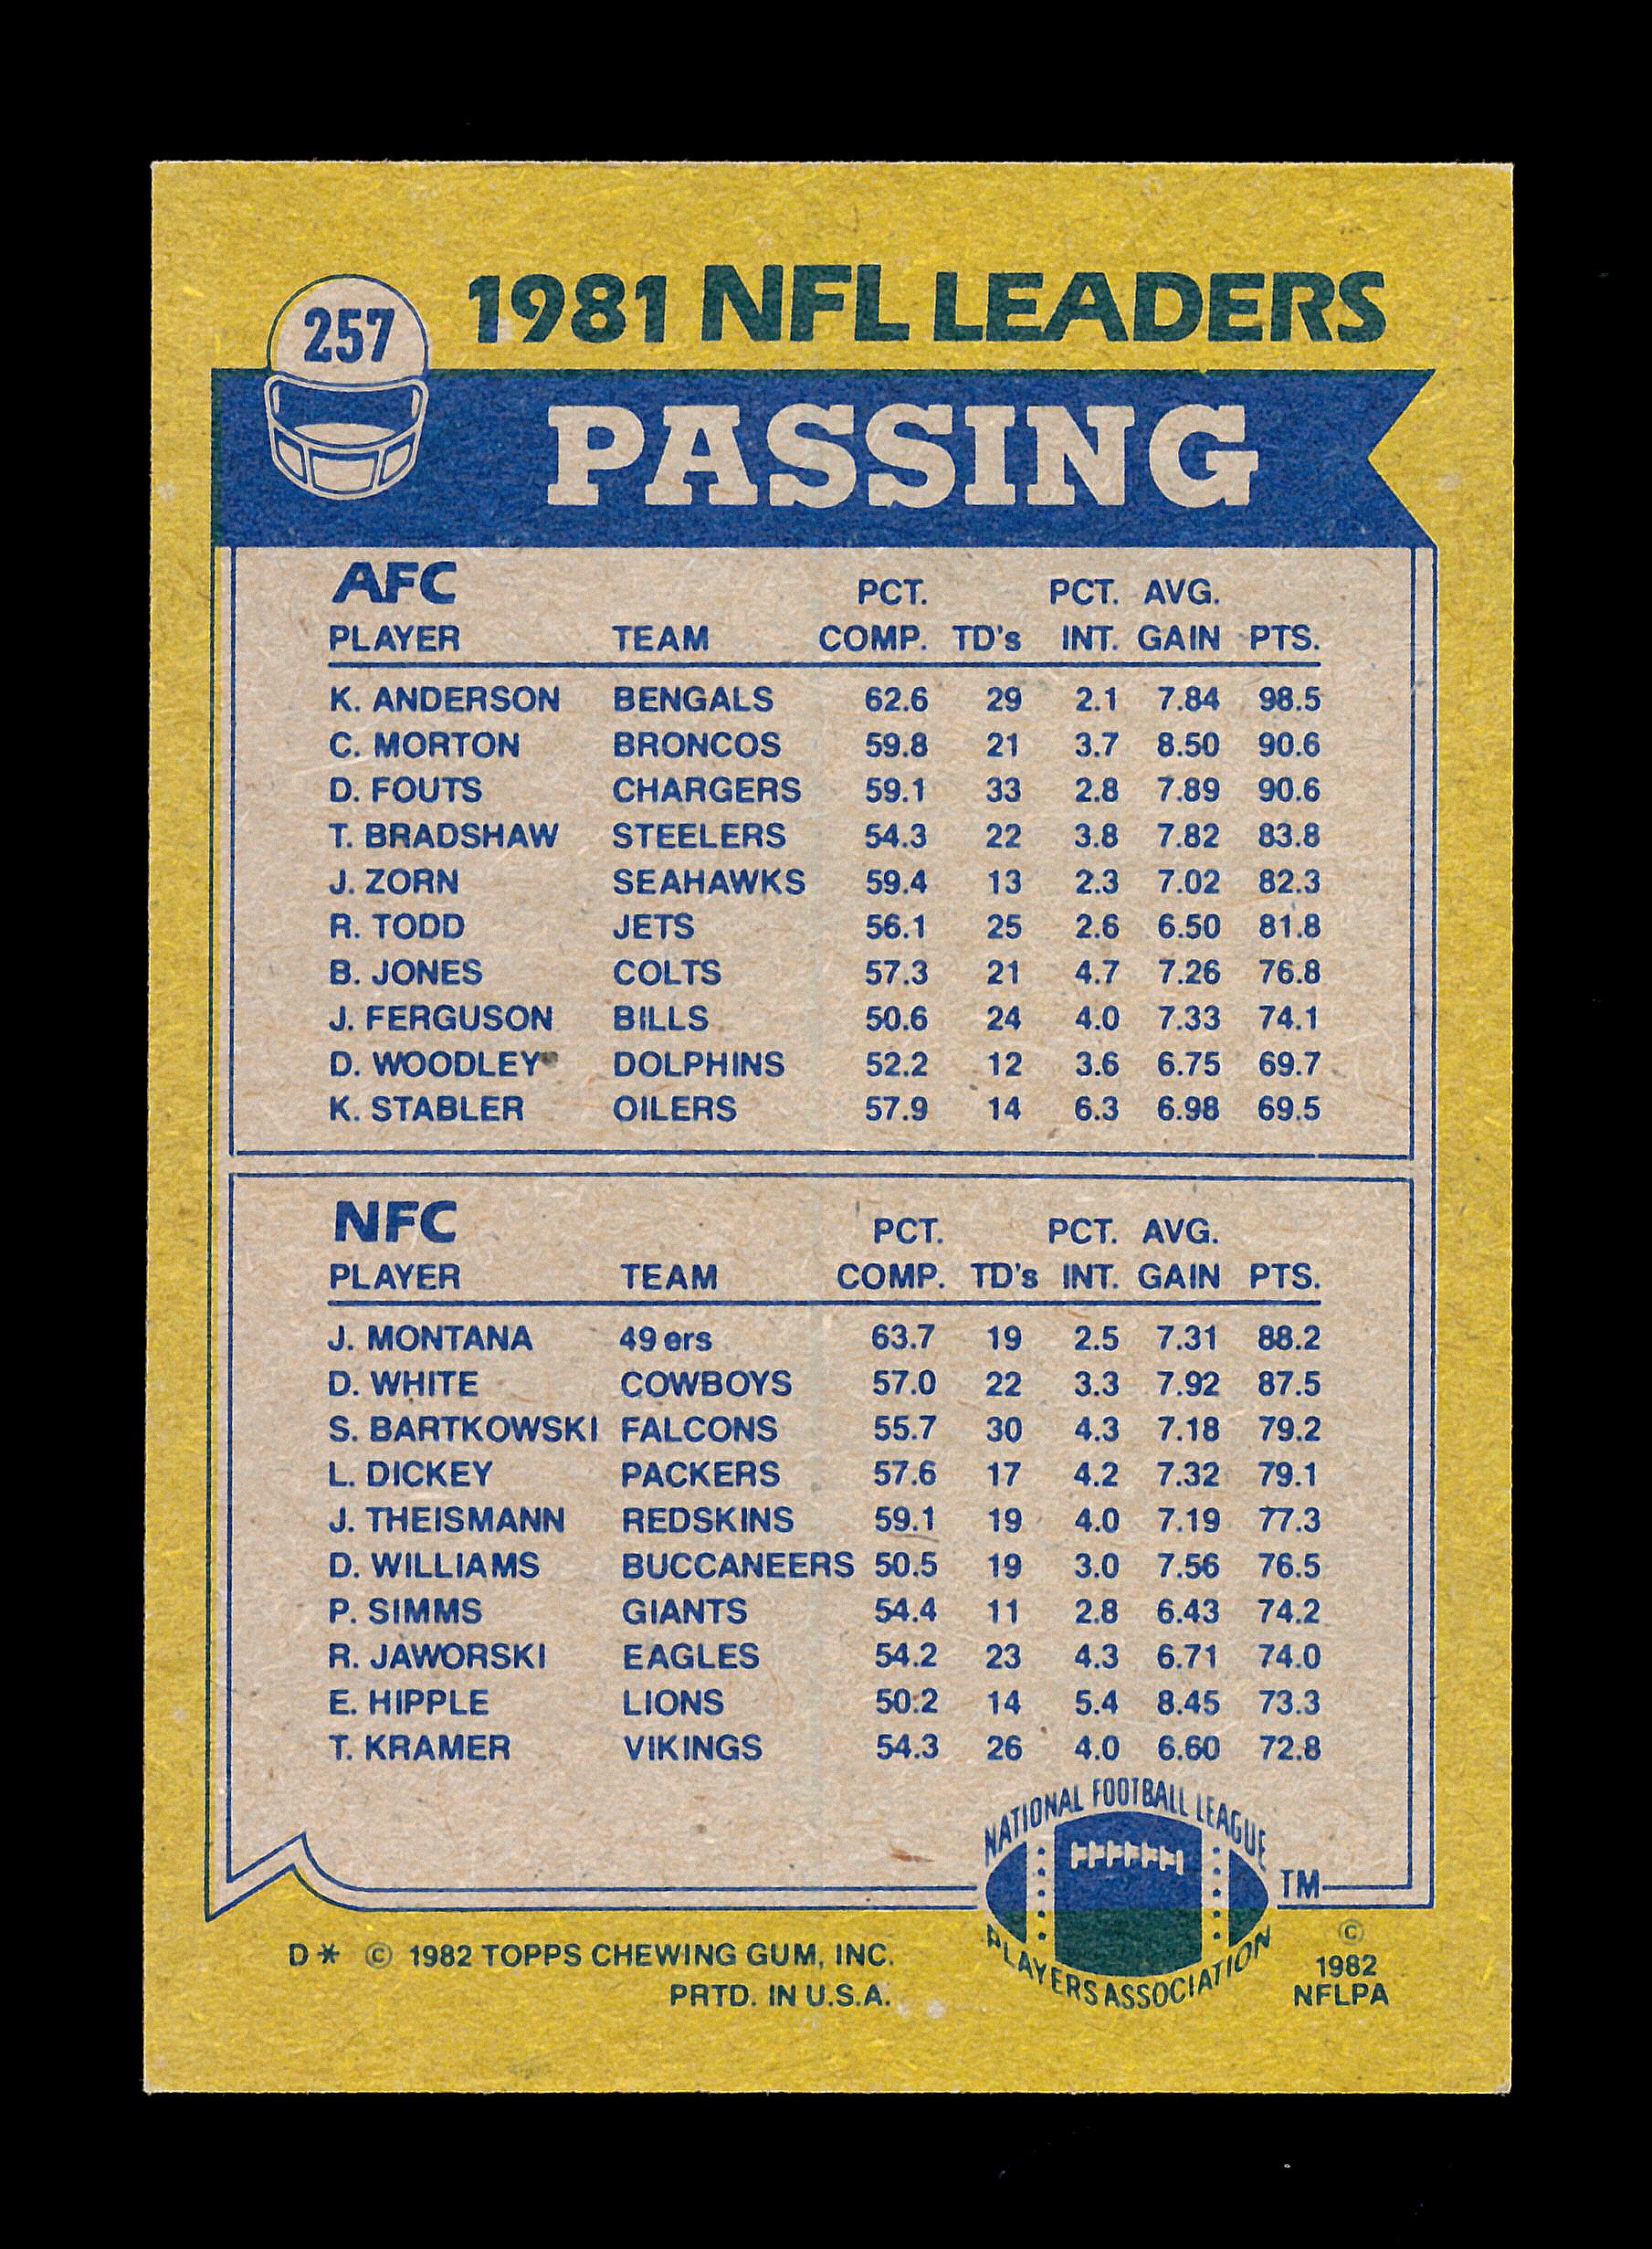 1979 Topps Football Card #257 Passing Leaders Anderson-Montana. NM+ Conditi